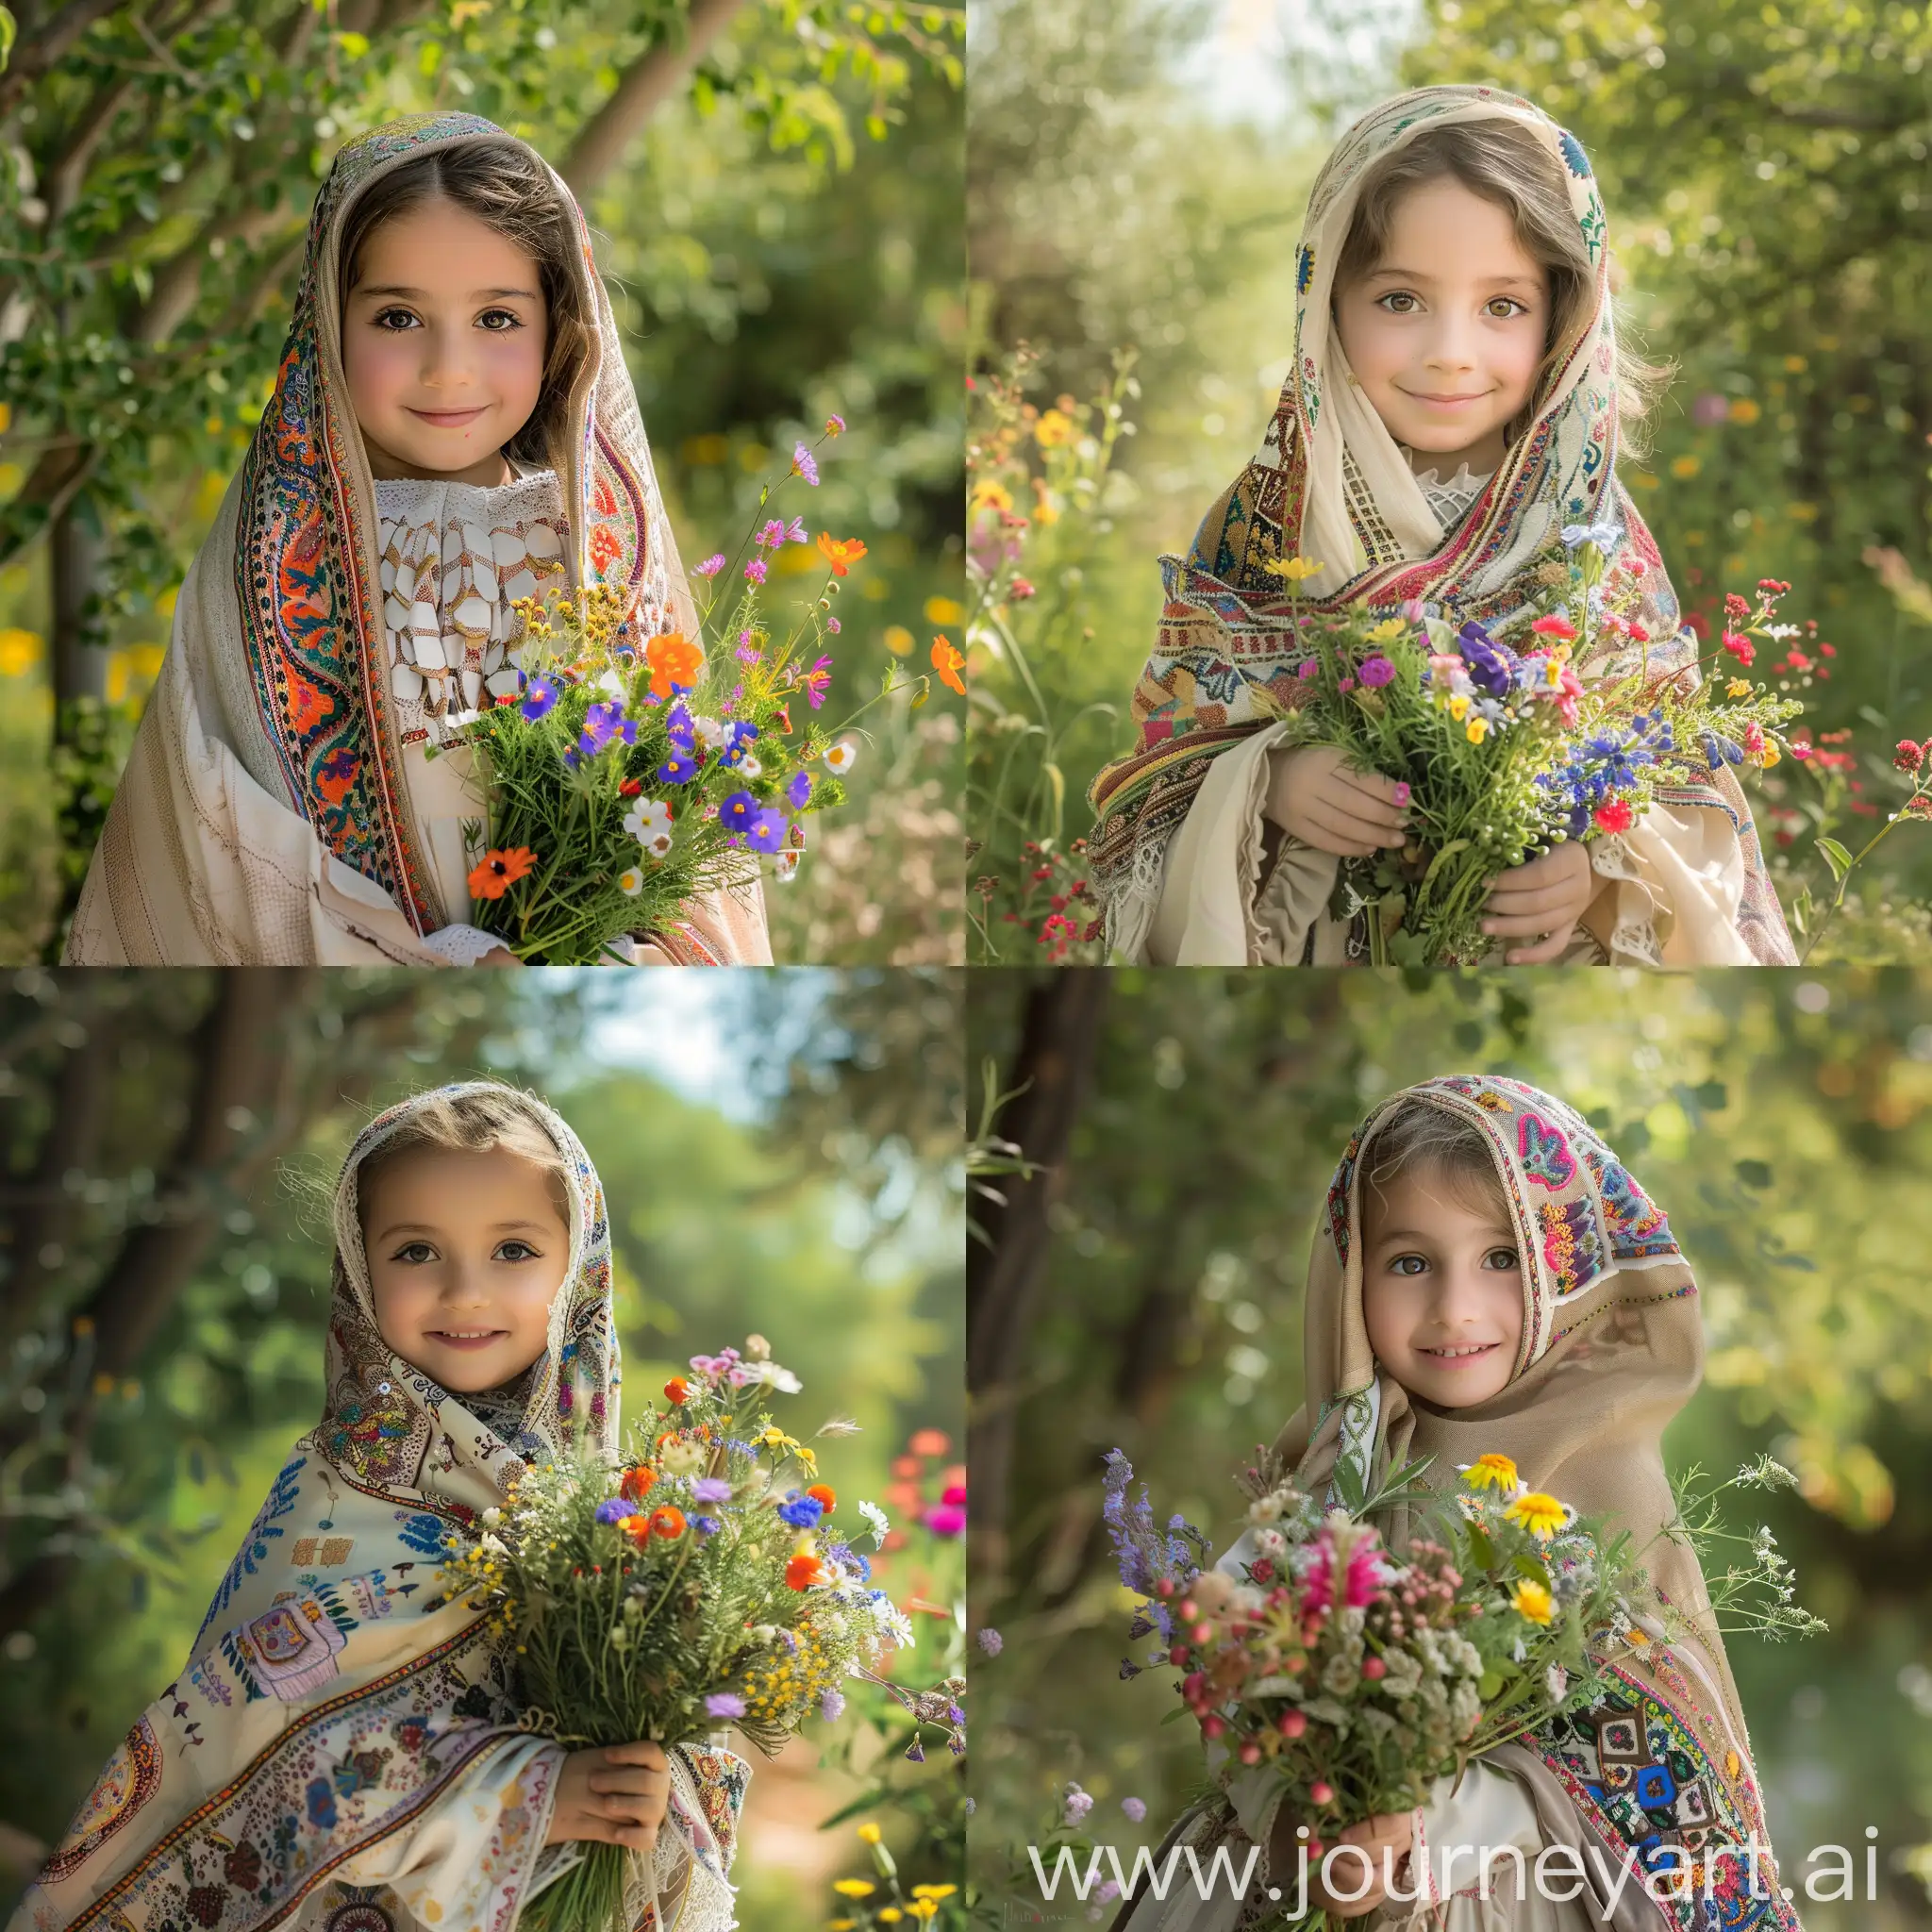 Innocent-Saudi-Arabian-Girl-Adorned-in-Traditional-Costume-with-Wildflower-Bouquet-in-Nature